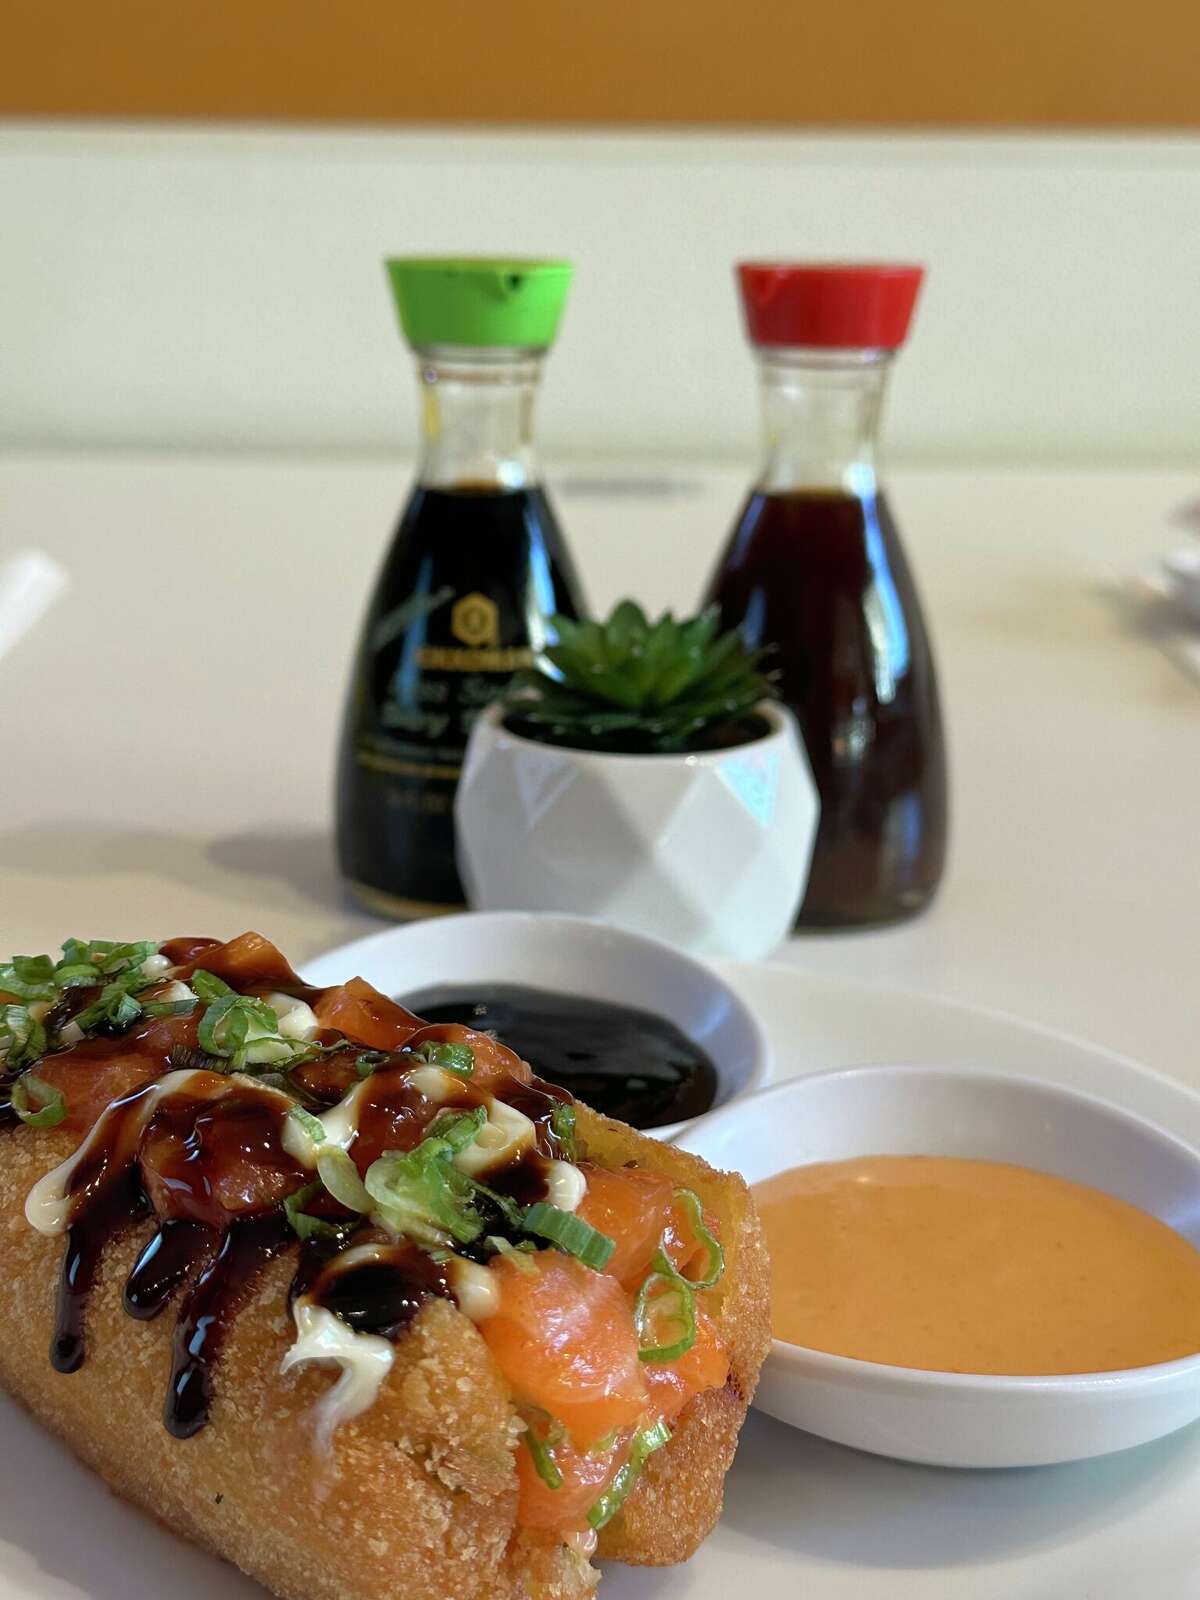 There is a new yellowfish sushi open near the airport, which means an opportunity to try out new items like the Japadog.